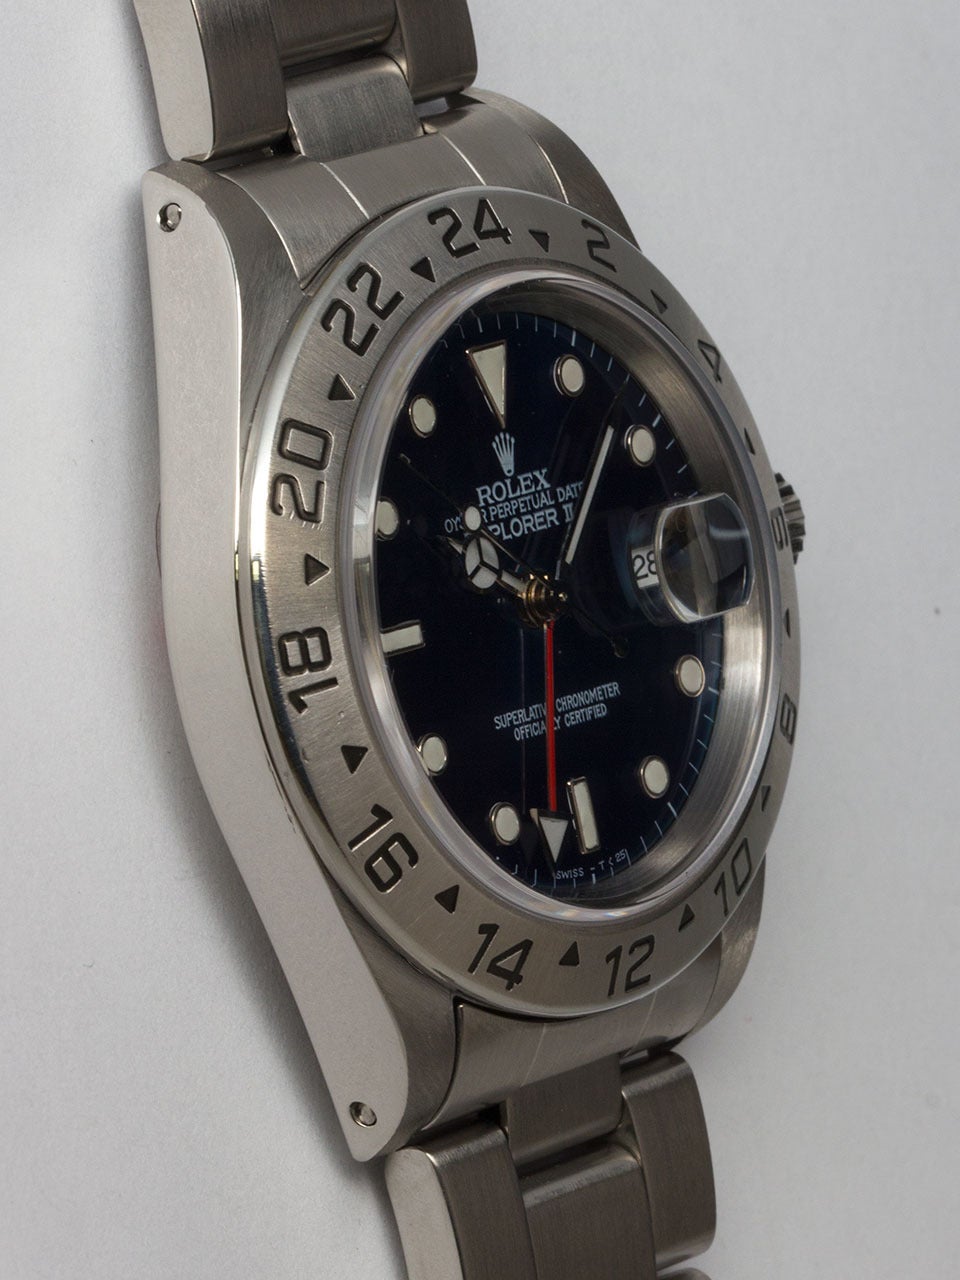 Rolex Stainless Steel Explorer II Wristwatch ref 16570 serial #U3 circa 1997. 40mm diameter case with fixed stainless steel 24 hour bezel and sapphire crystal. Custom colored Sapphire Blue dial with steel surround luminous indexes, hands and red 24